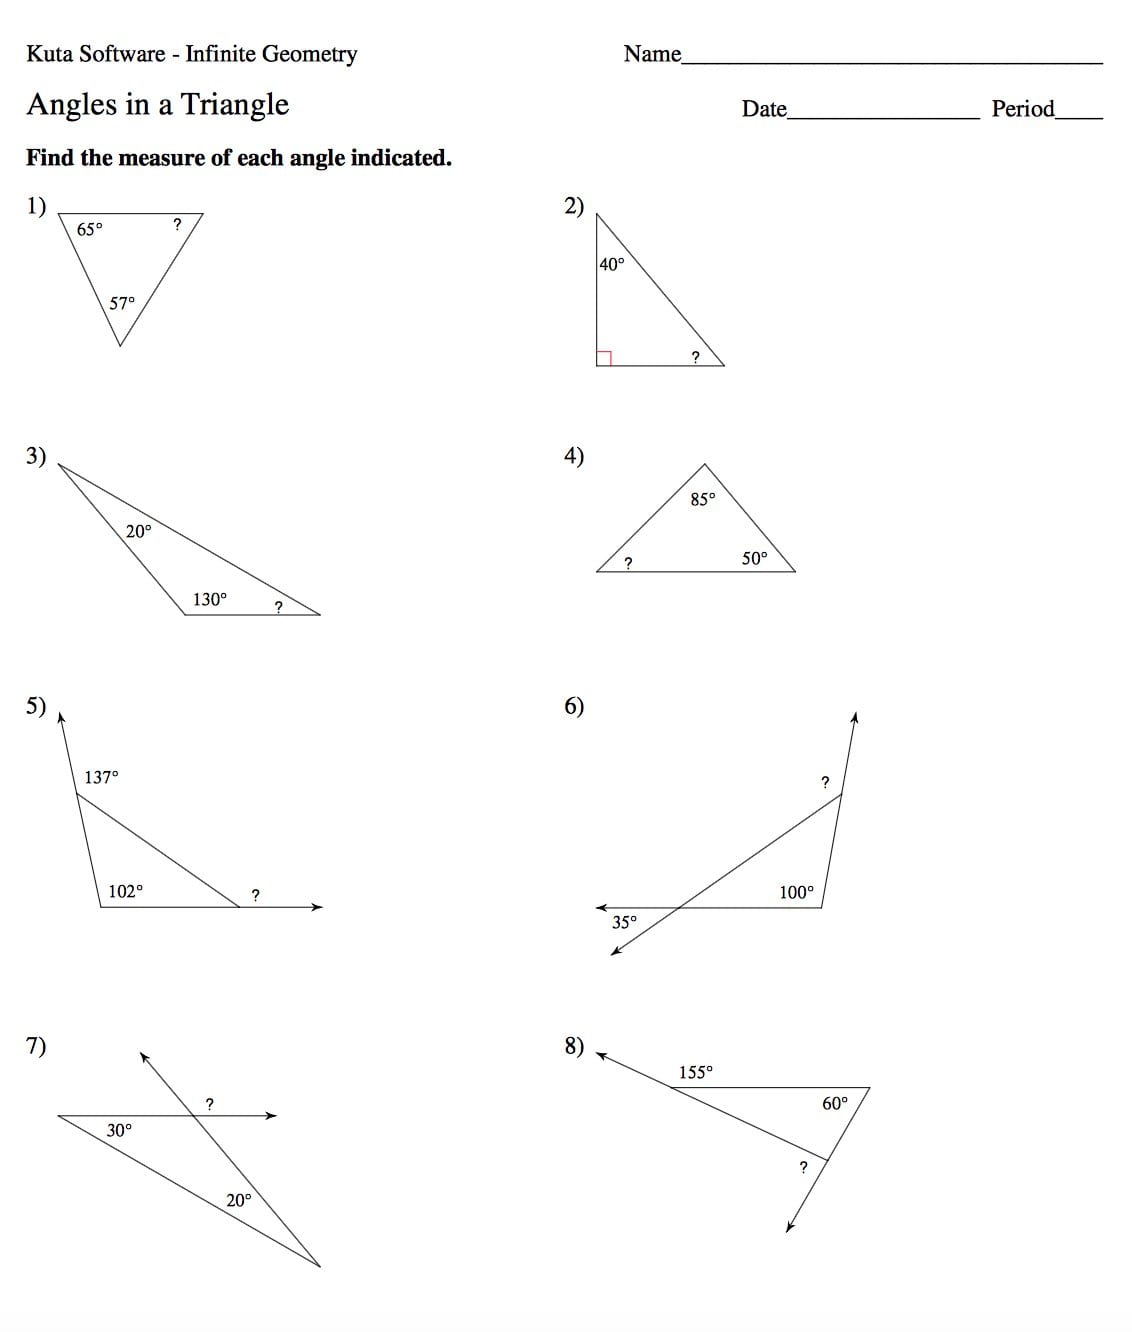 Triangle Sum And Exterior Angle Theorem Worksheet  Yooob Along With Find The Measure Of Each Angle Indicated Worksheet